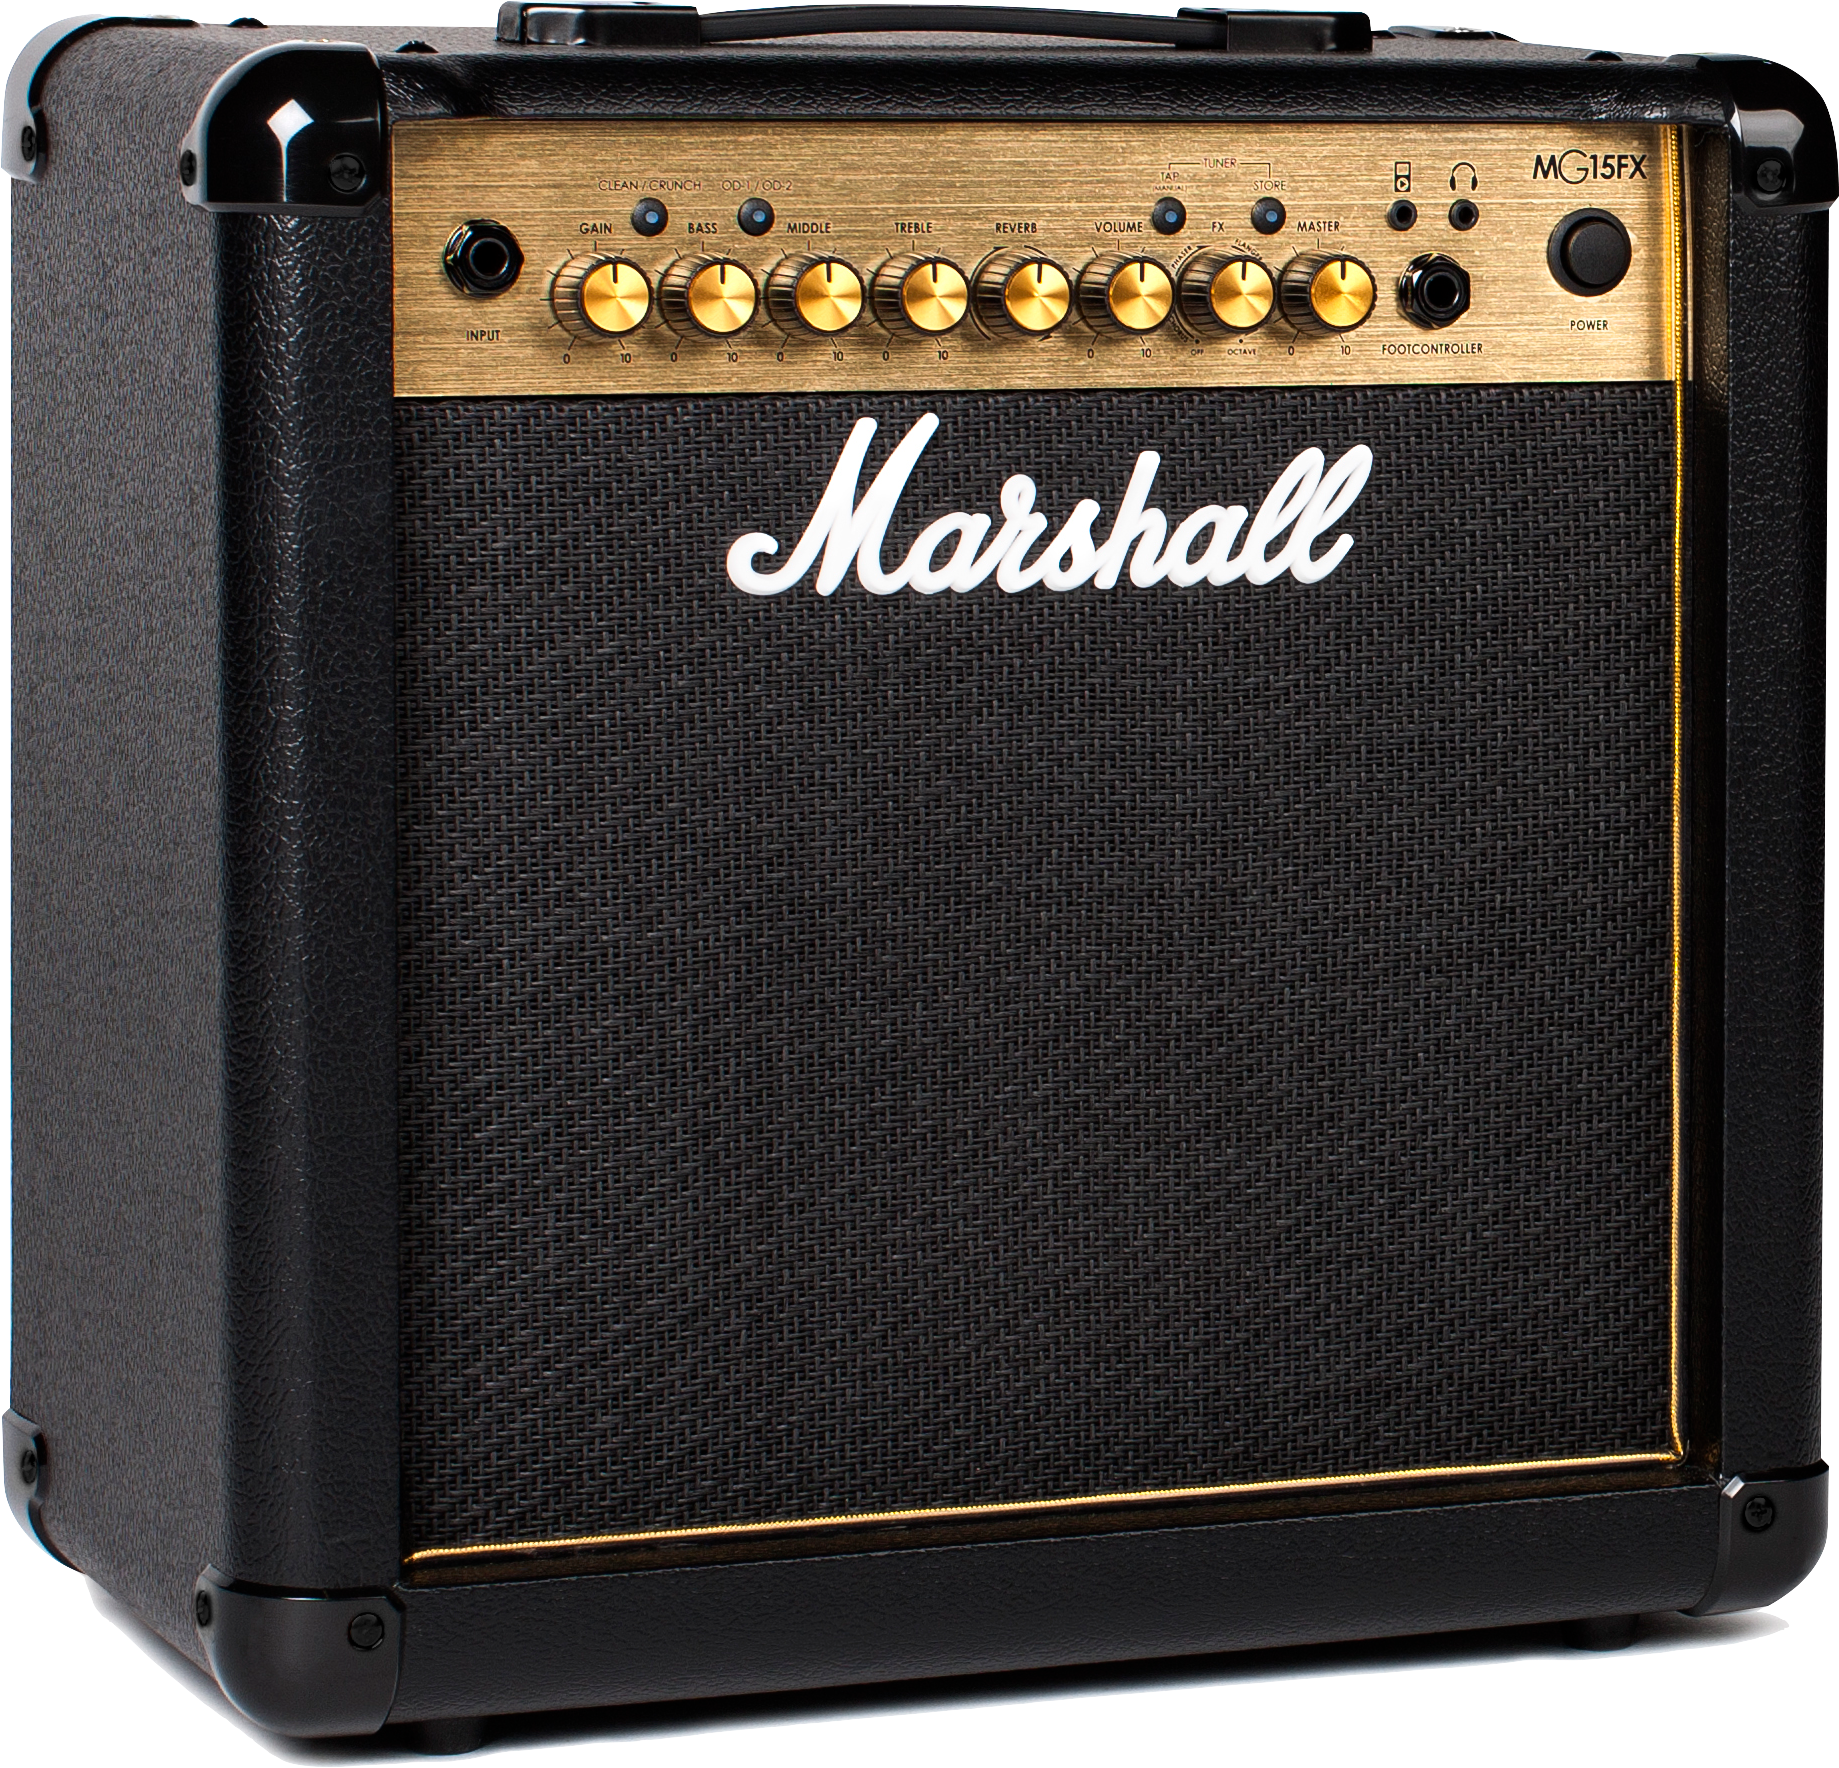 Marshall Mg15fx Mg Gold 15w 1x8 - Combo amplificador para guitarra eléctrica - Main picture